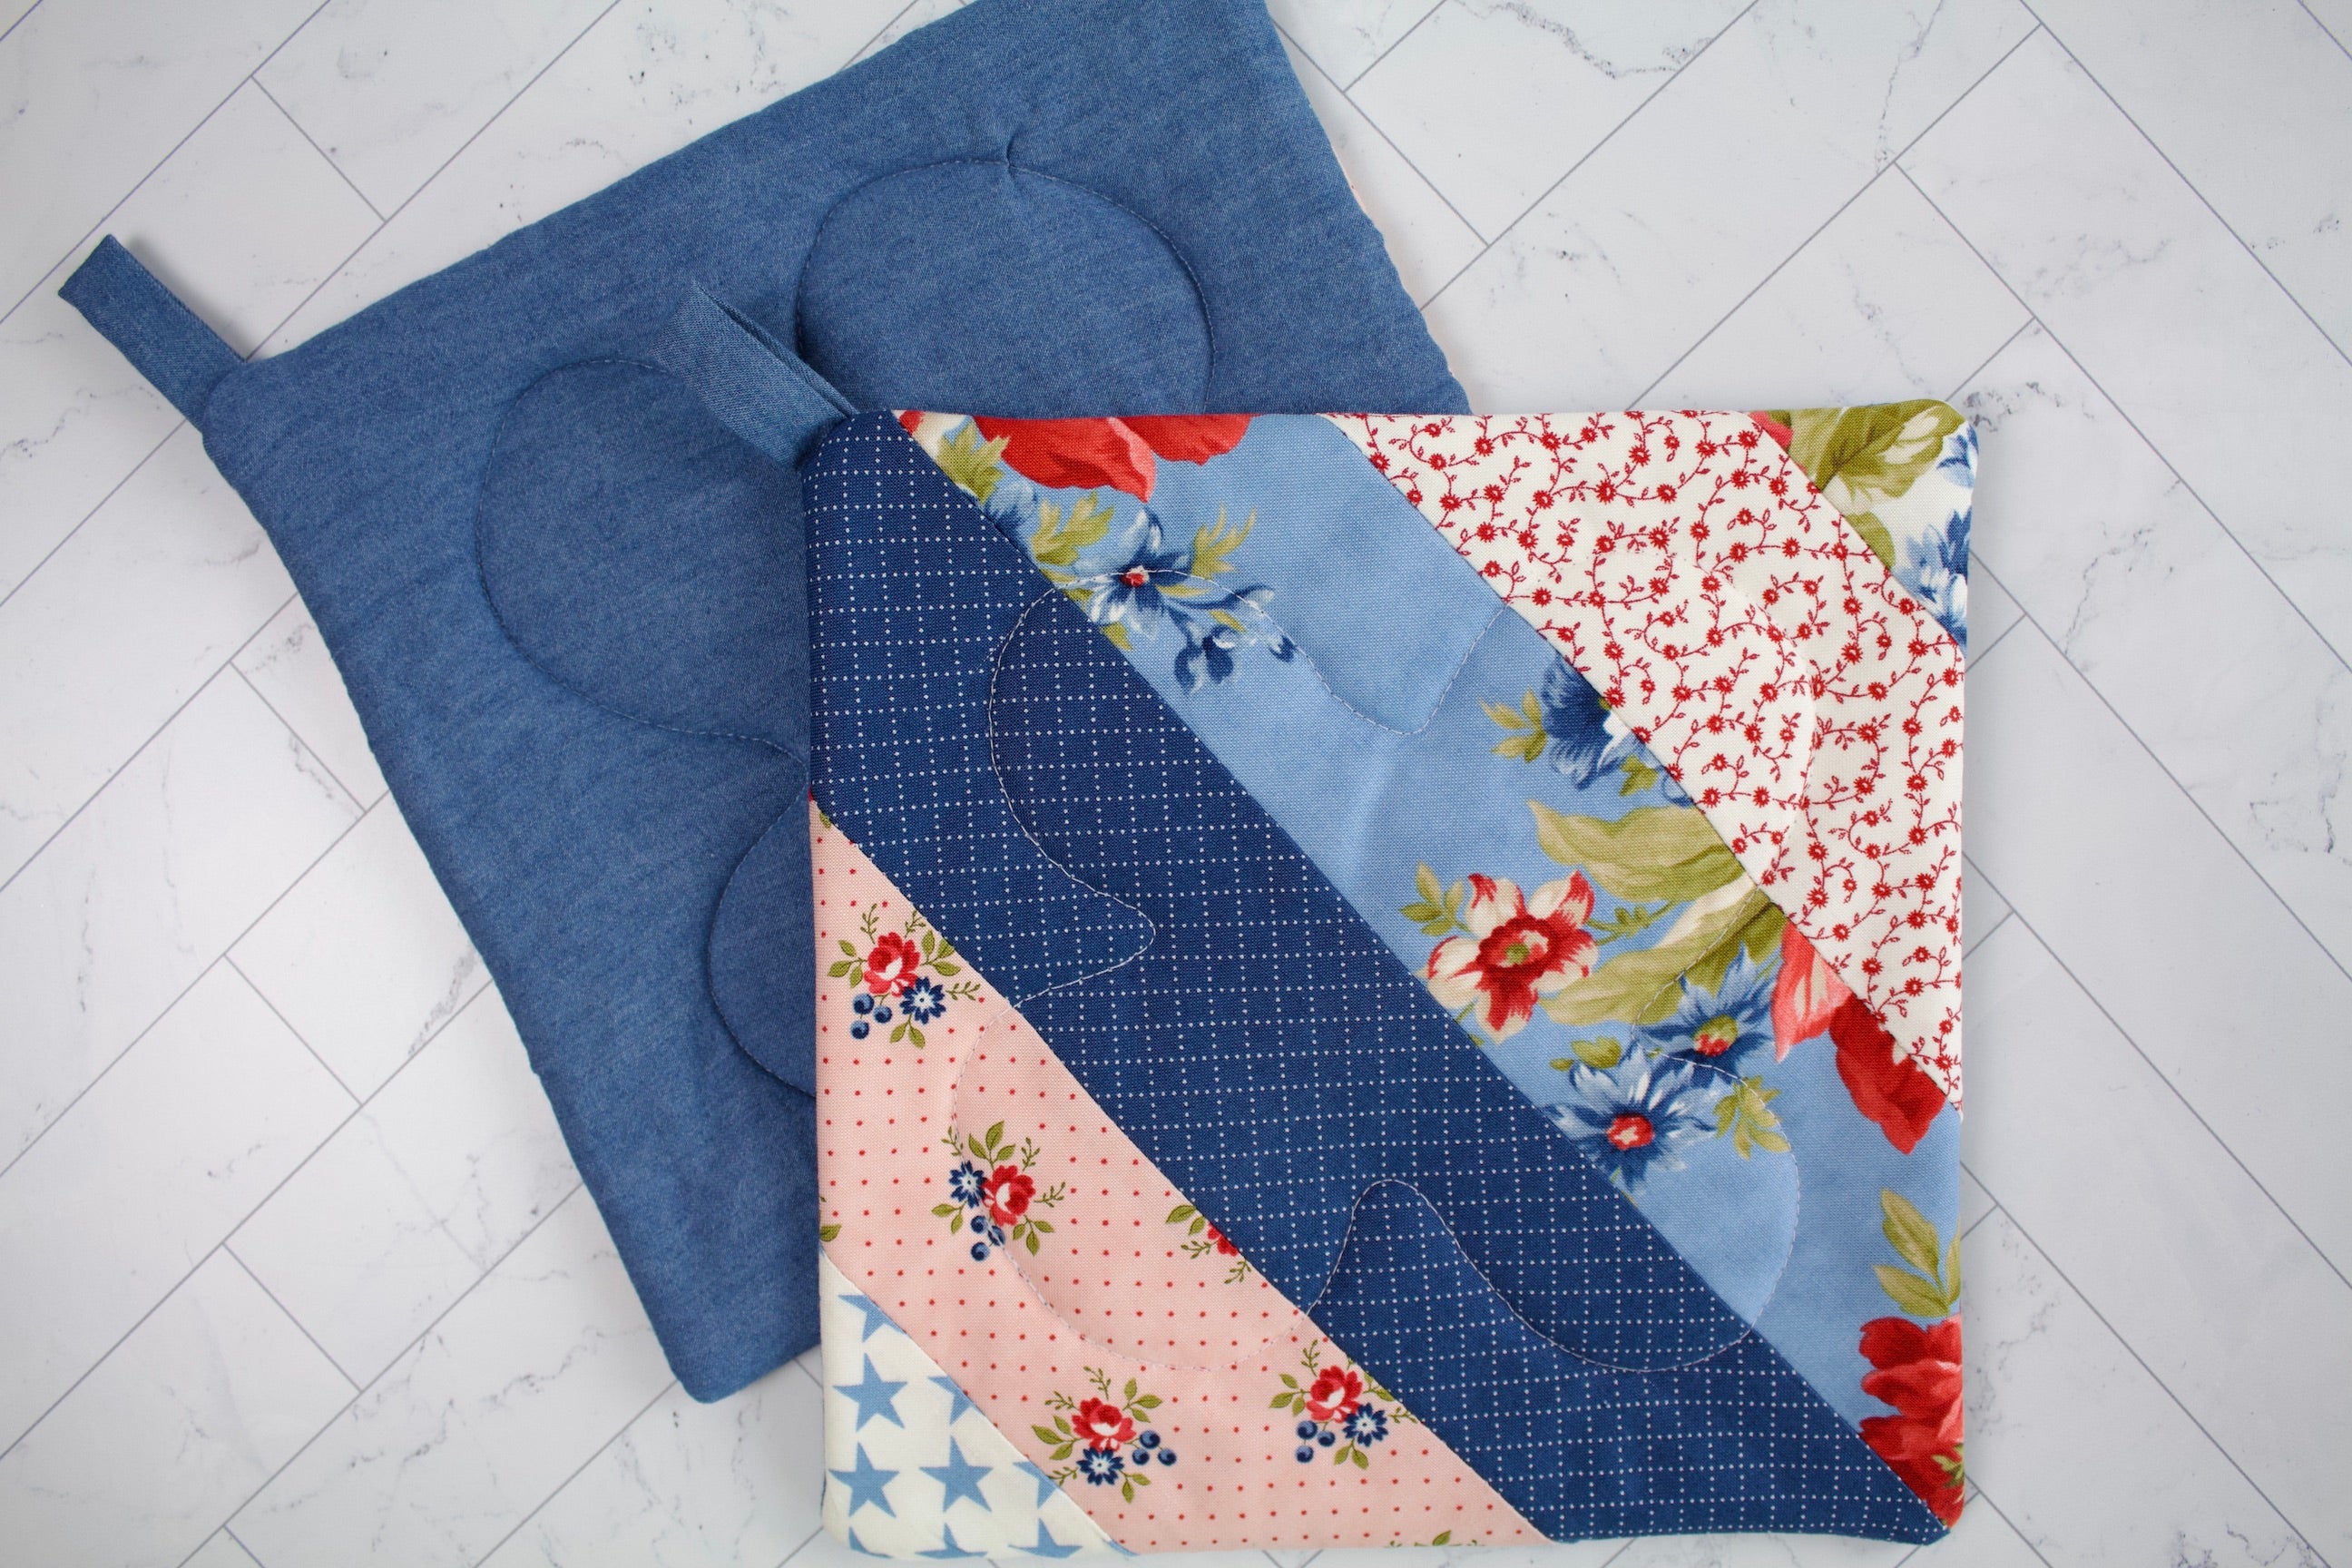 Red, White and Blue Pieced Potholder